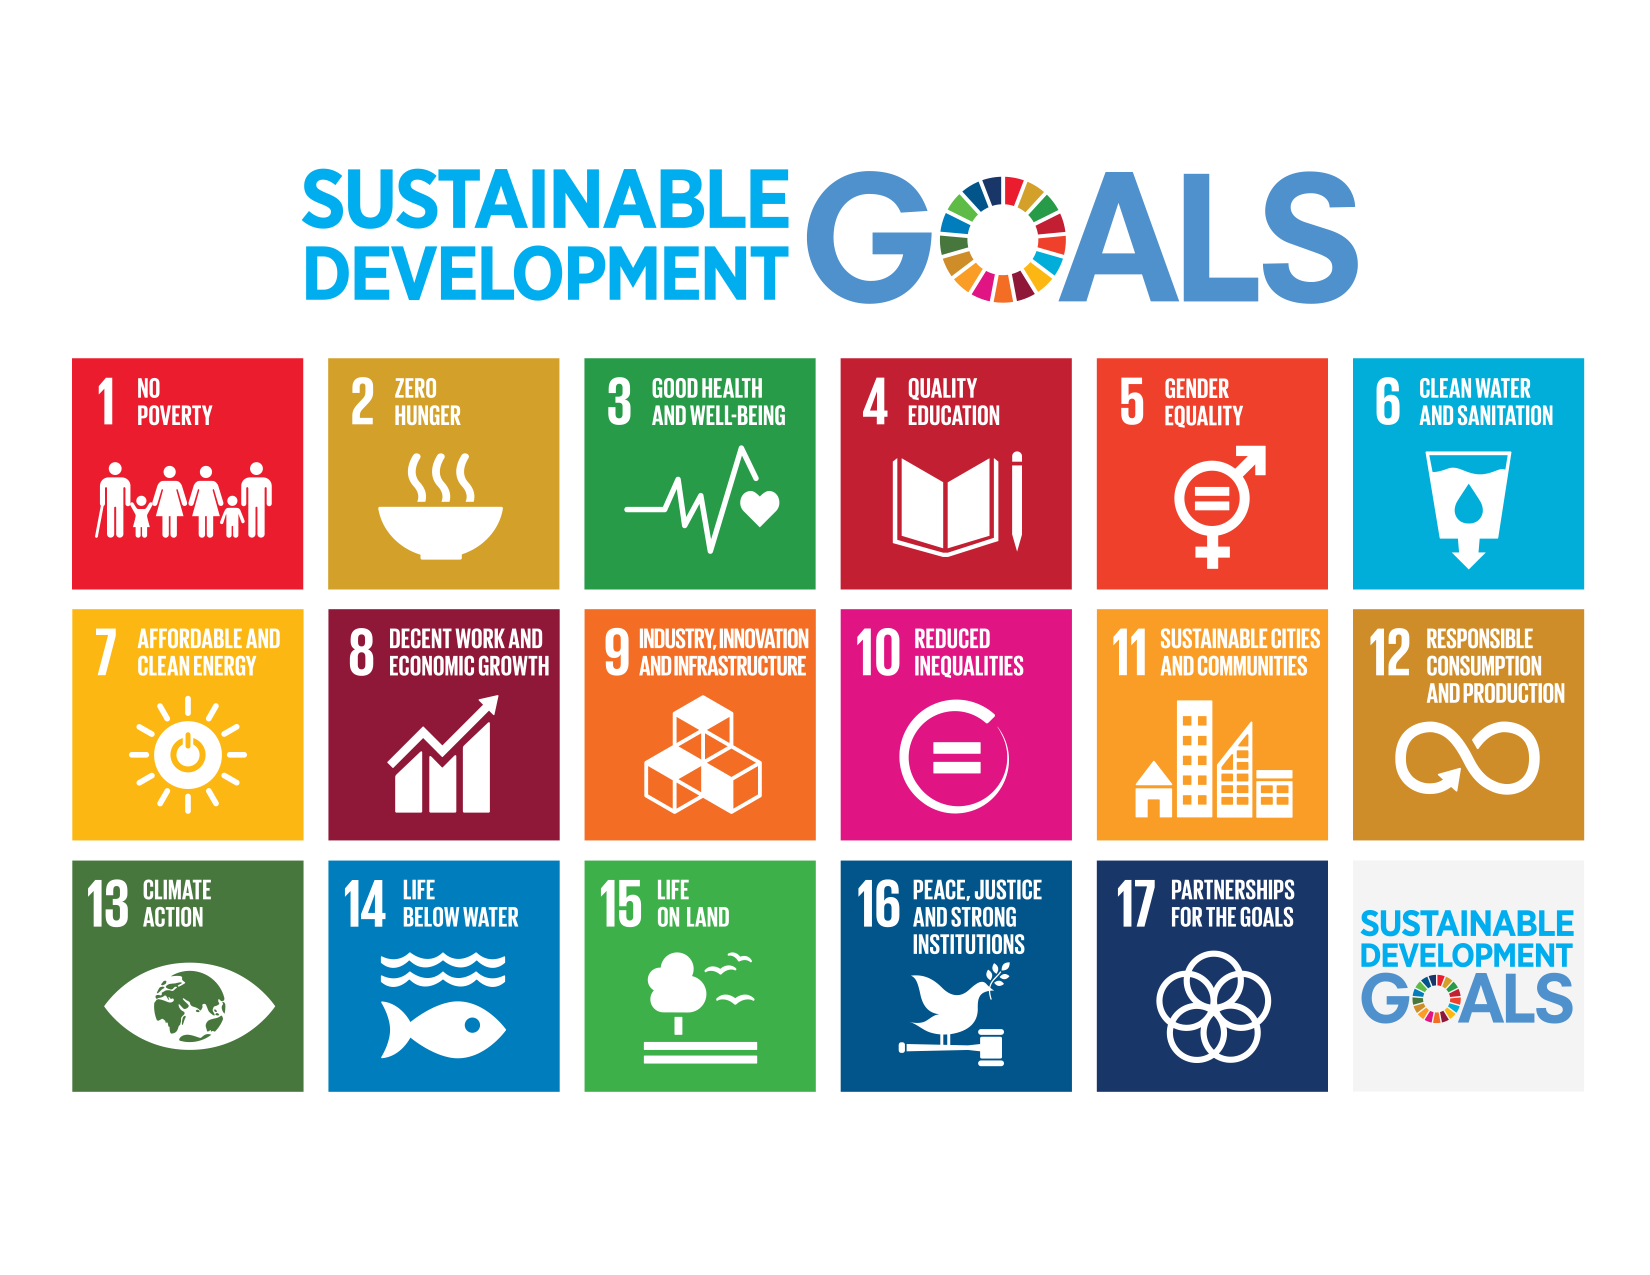 Sustainable Development Goals logo and icons. ODI supports the SDGs.